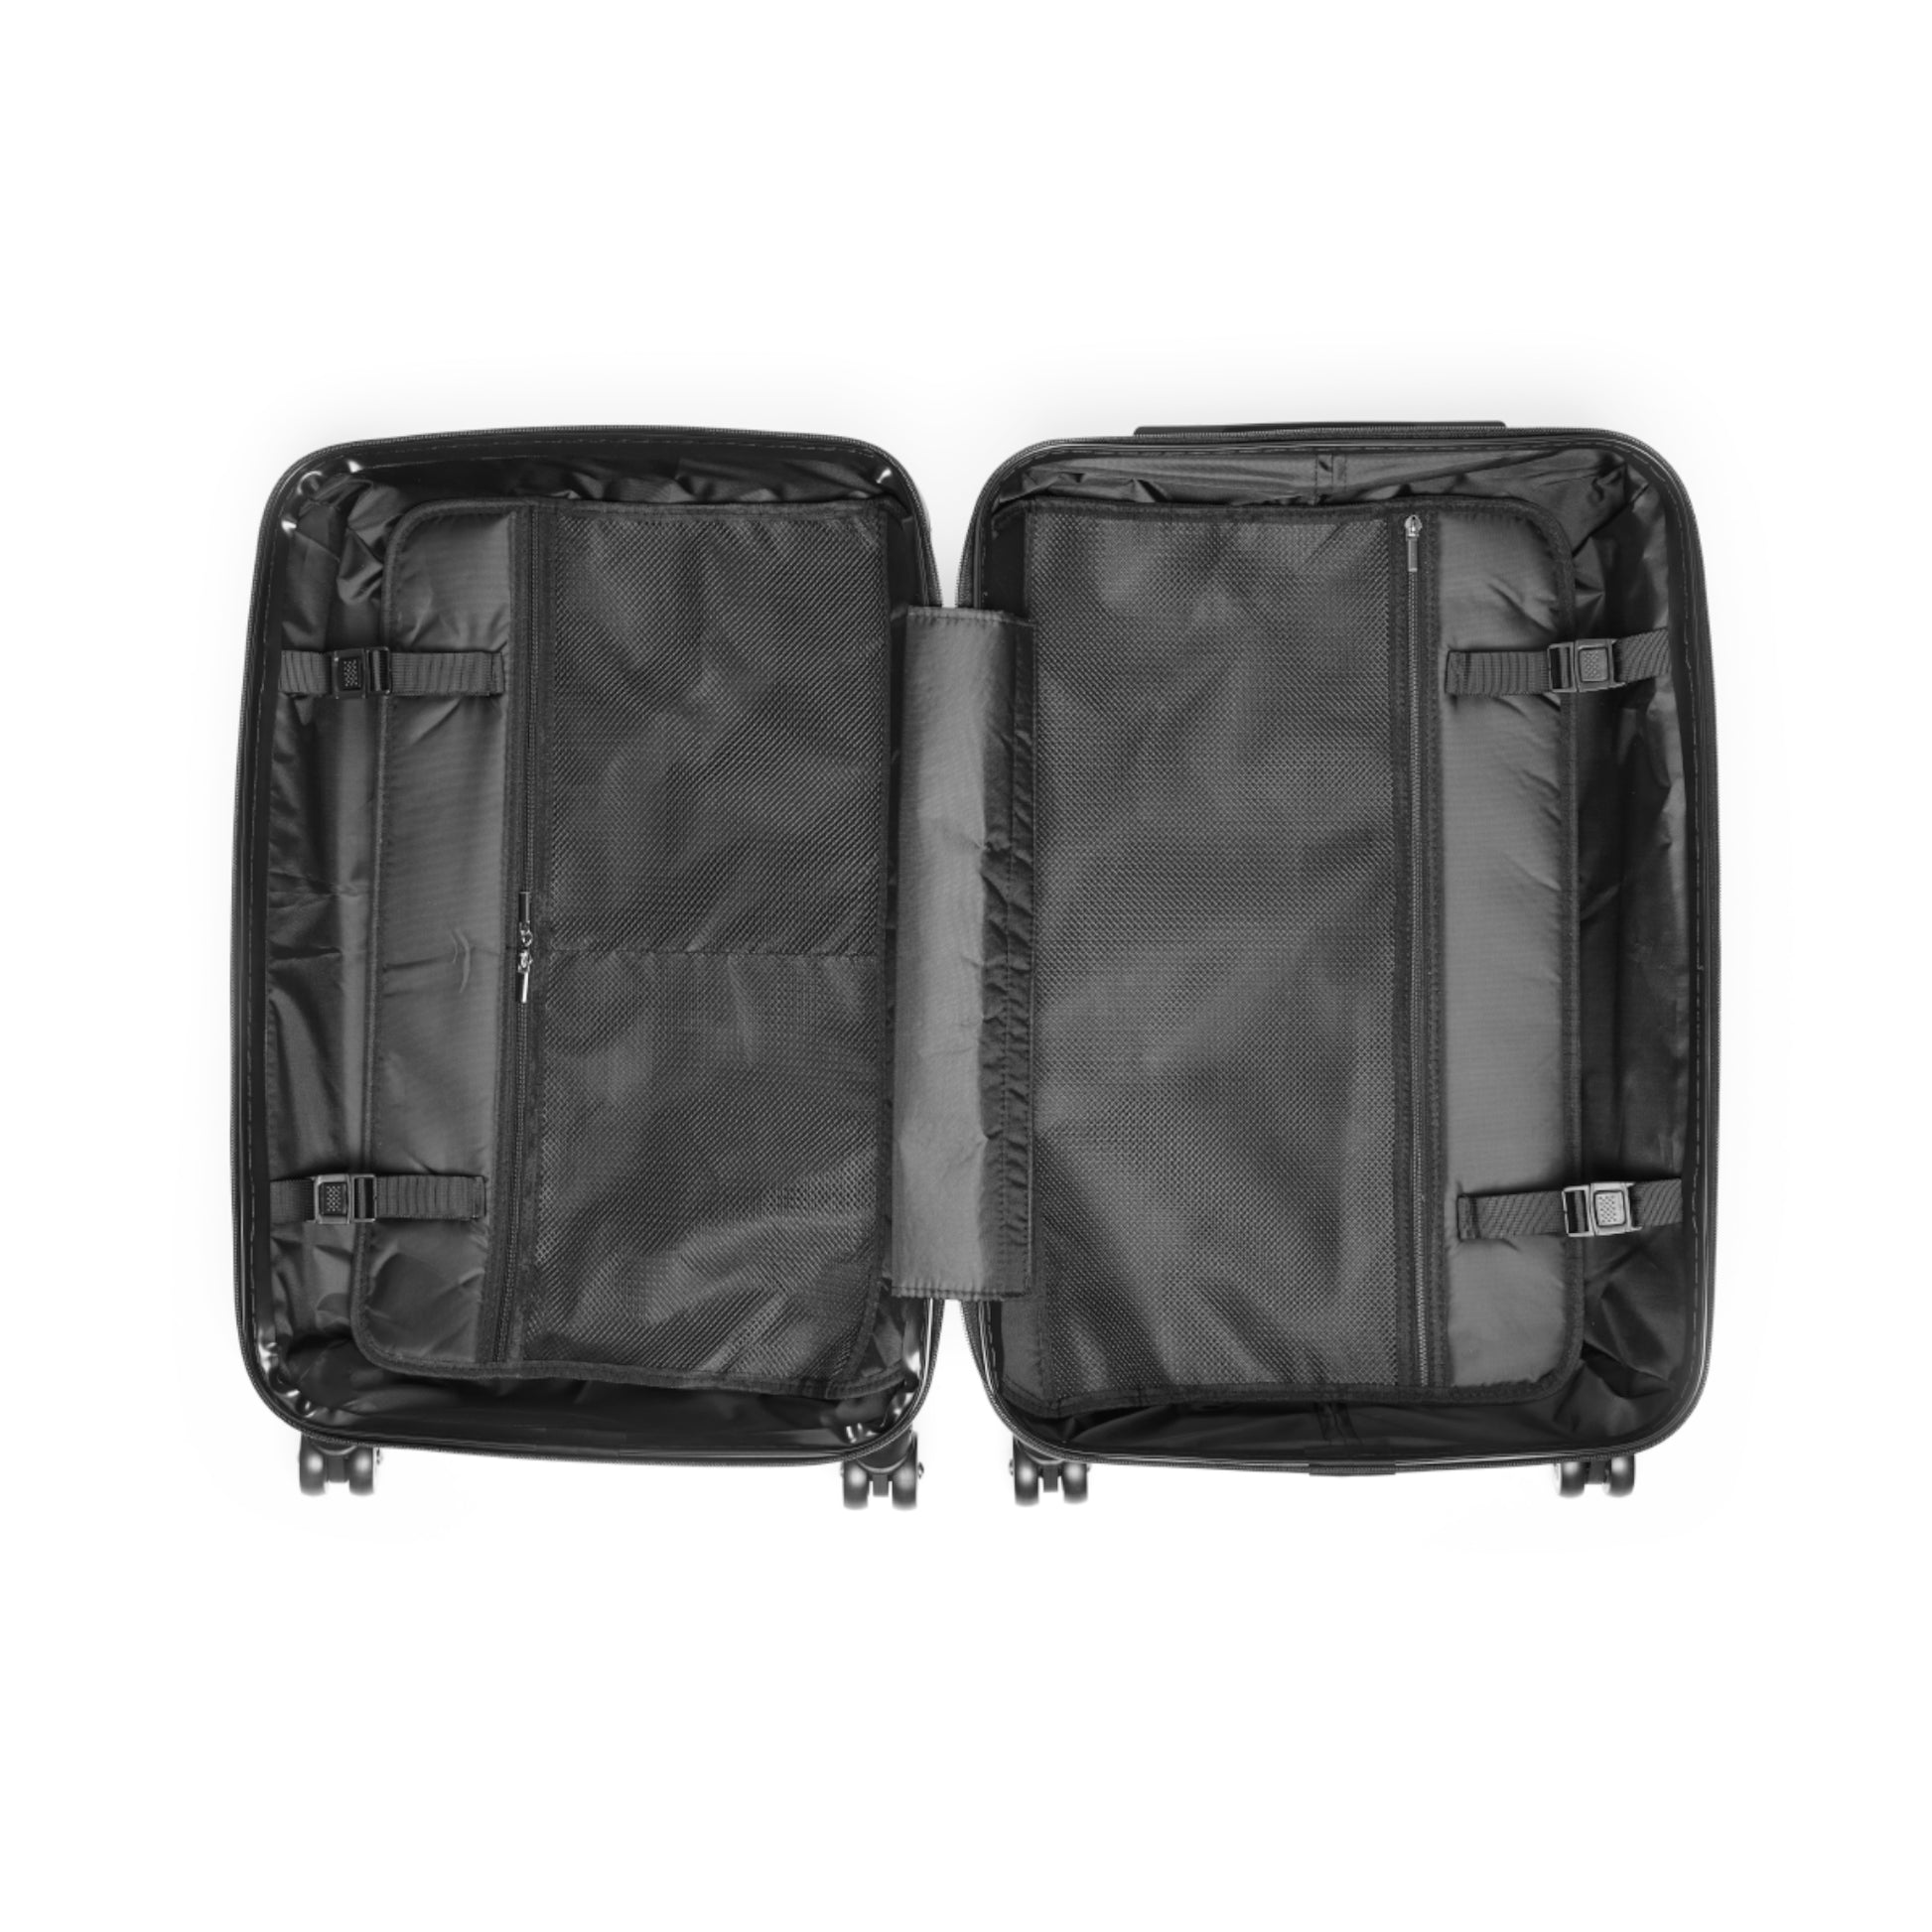 Inside view of suitcase zippers pockets straps black